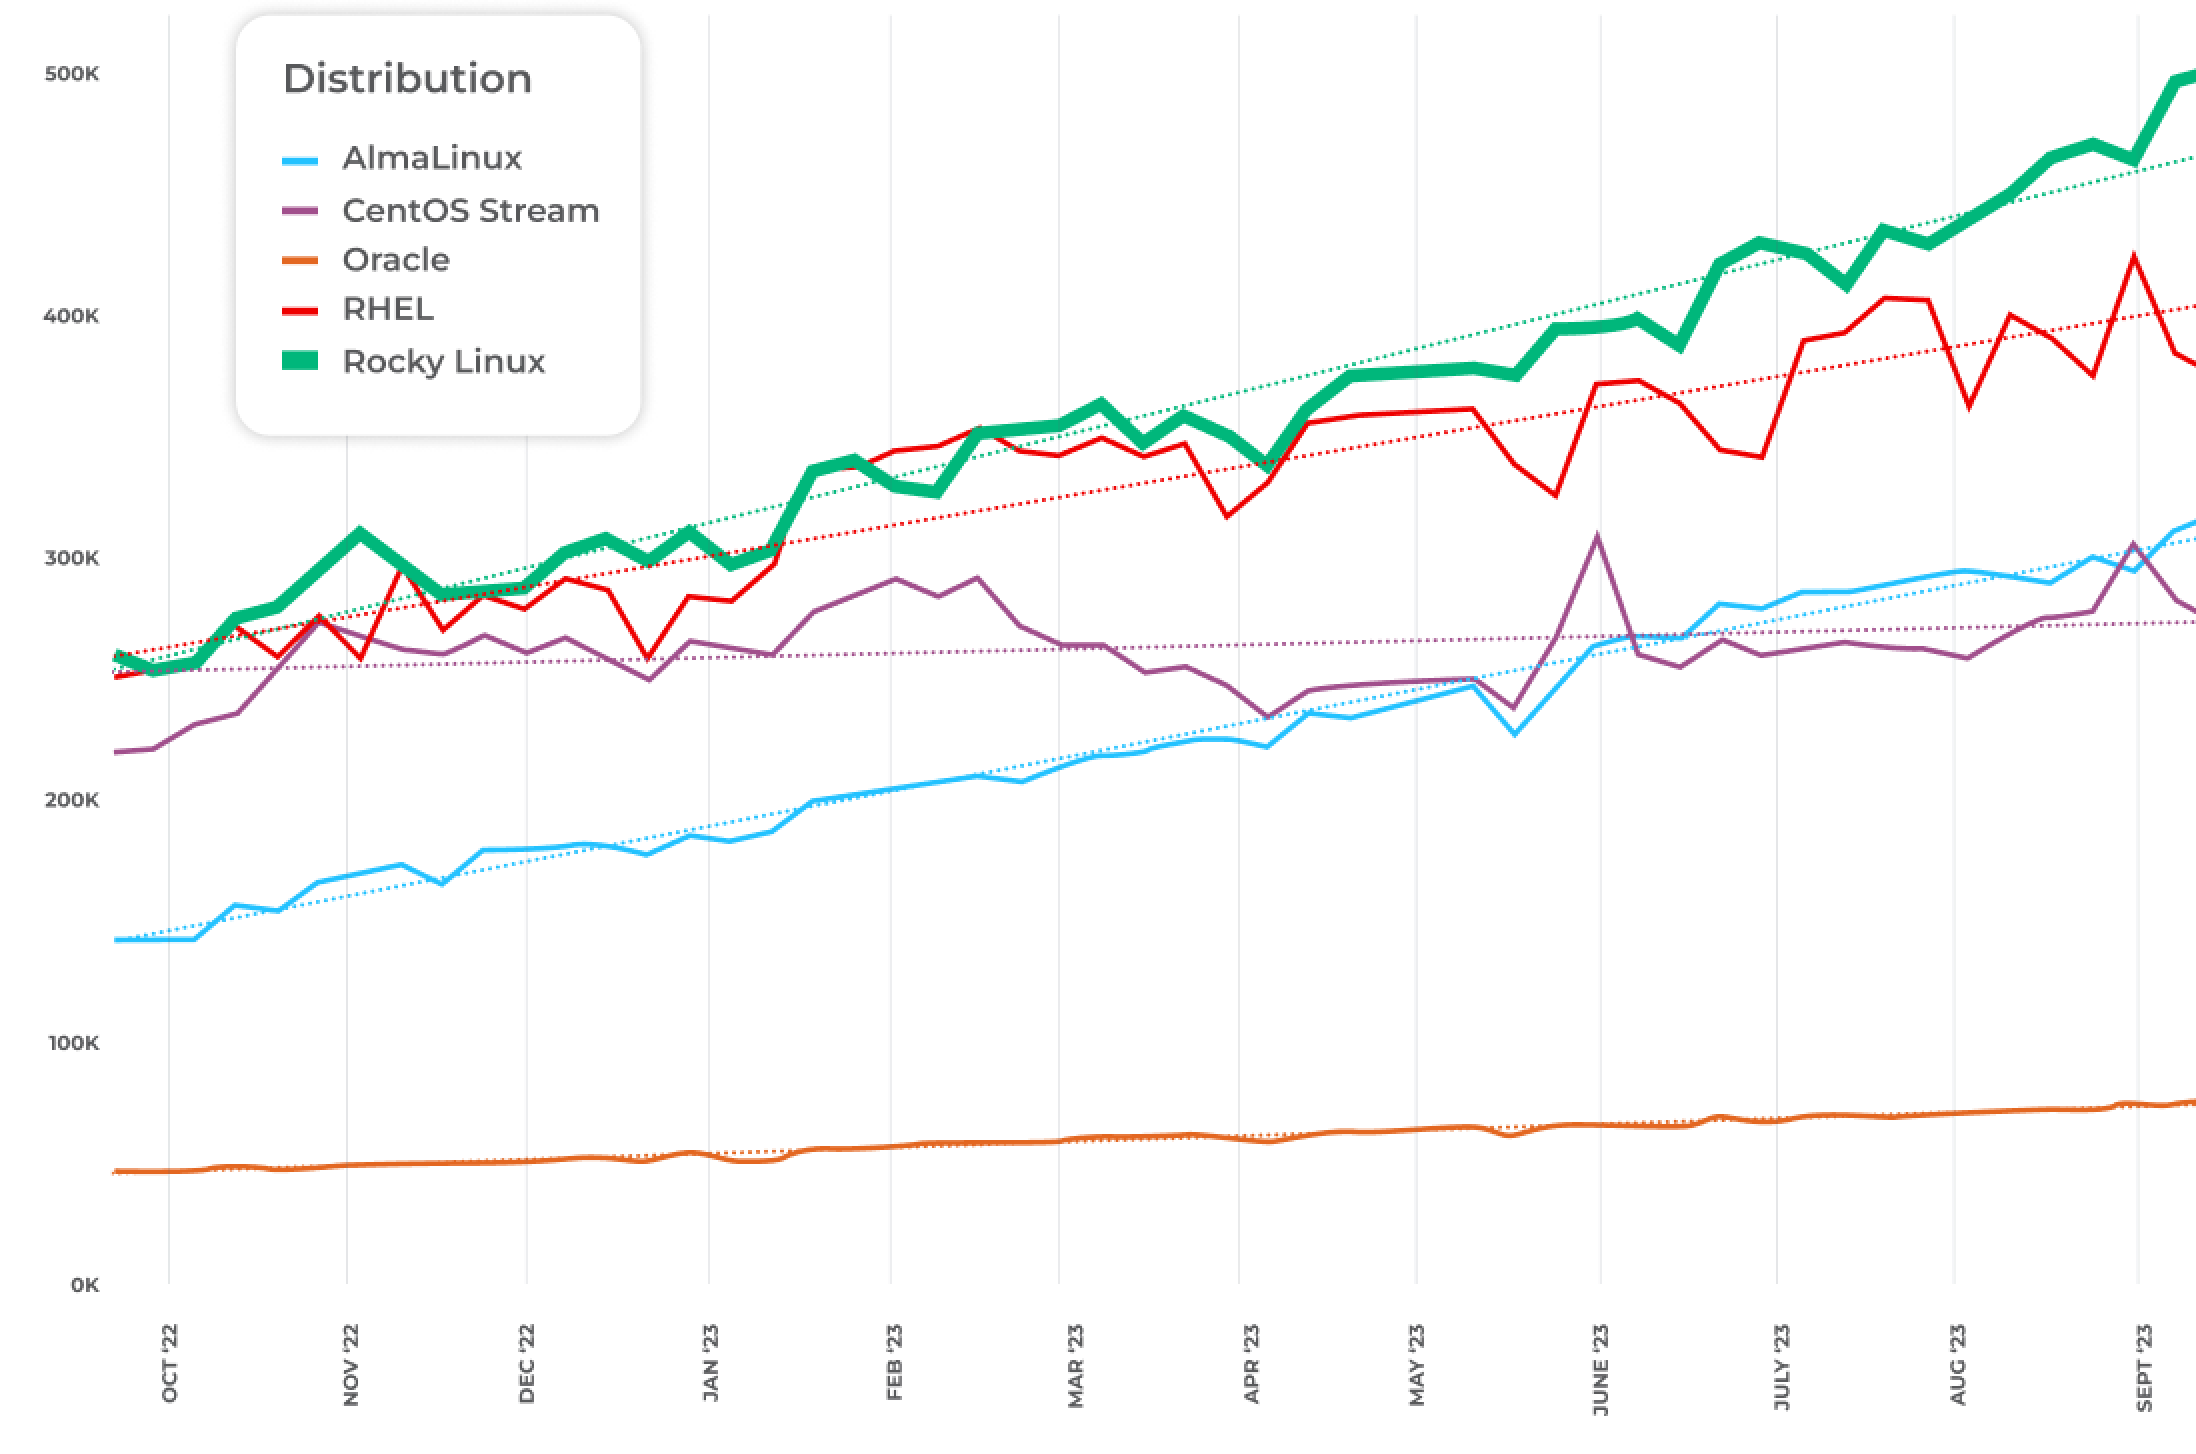 A line graph titled ‘The Rise of Rocky Linux’ shows the increasing popularity of Rocky Linux compared to other enterprise Linux distributions, including AlmaLinux, CentOS Stream, Oracle Linux, and Red Hat Enterprise Linux (RHEL). The y-axis is labeled ‘Distribution’ and the x-axis is labeled ‘Year’. The data points for each distribution are represented by lines in different colors. The line for Rocky Linux is blue and it is the highest line on the graph, indicating that it is the most popular distribution. The line for RHEL is green and it is the second highest line on the graph. The lines for the other distributions are lower on the graph.